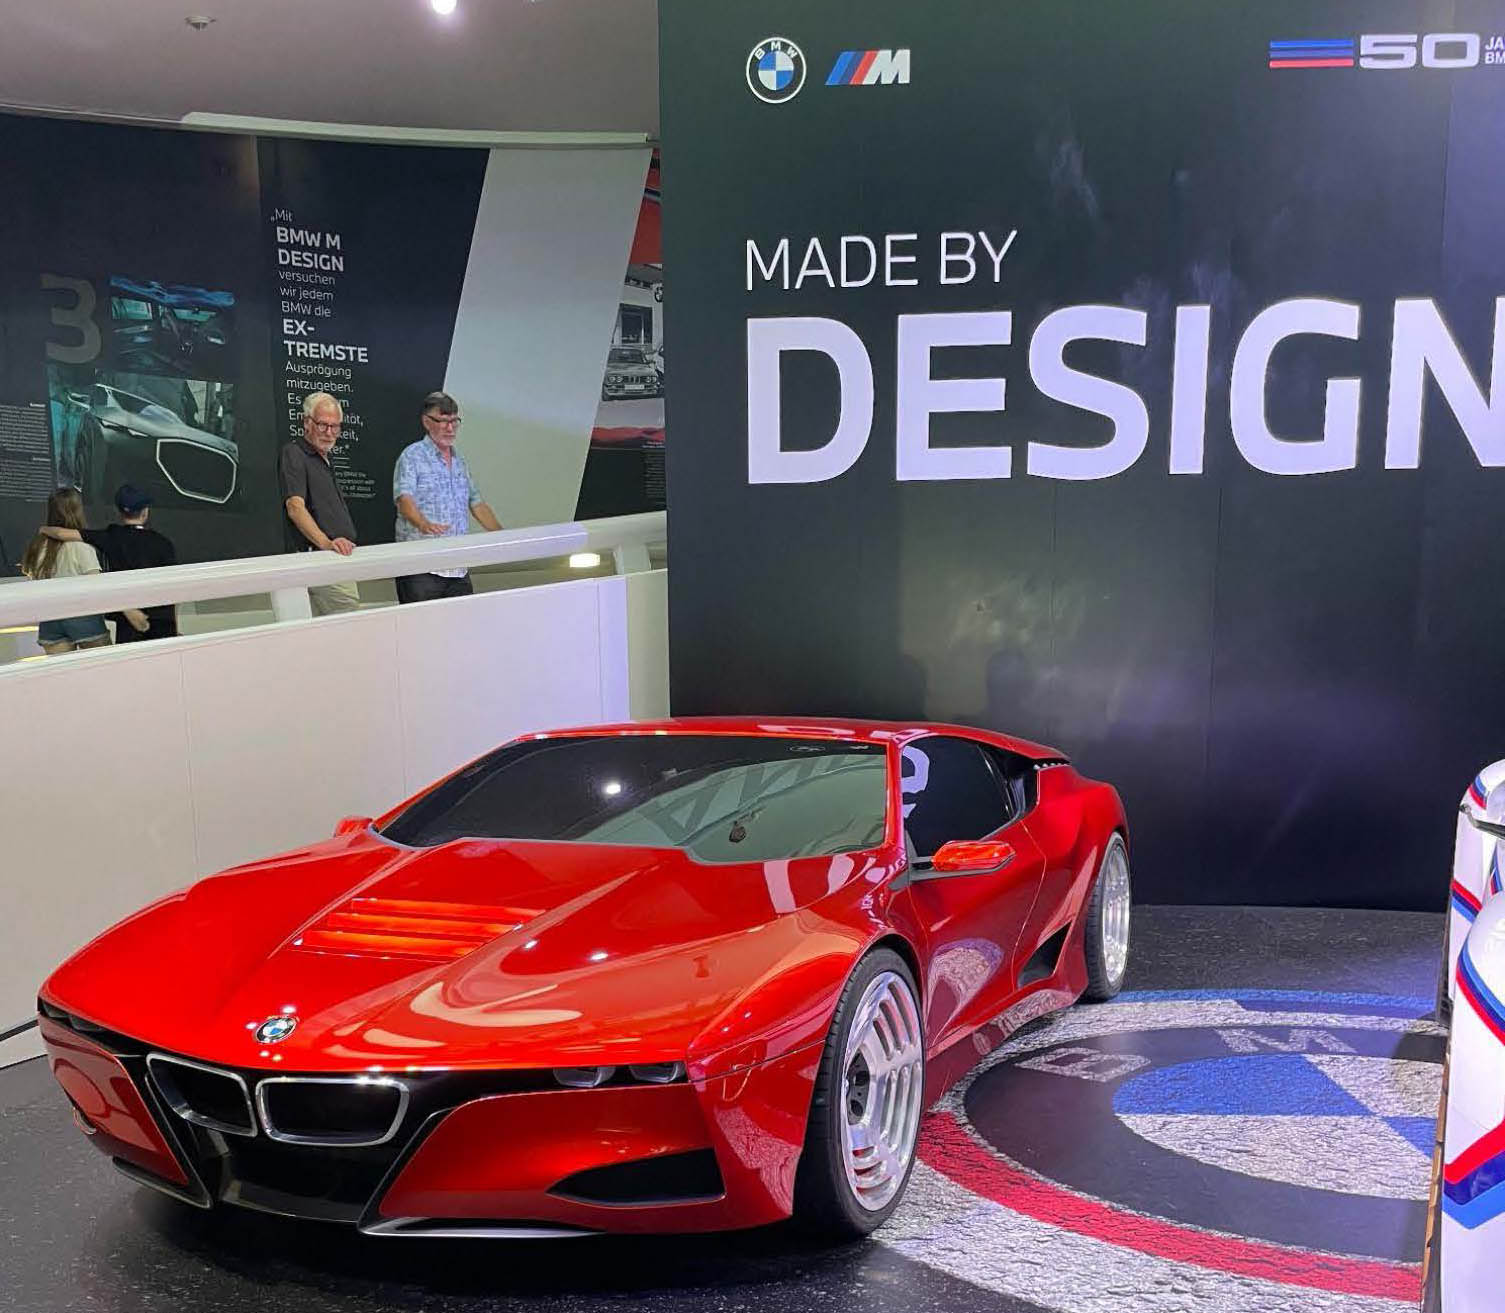 A BMW M-1 vehicle was among the cars on display at the BMW Museum in Munich, Germany.